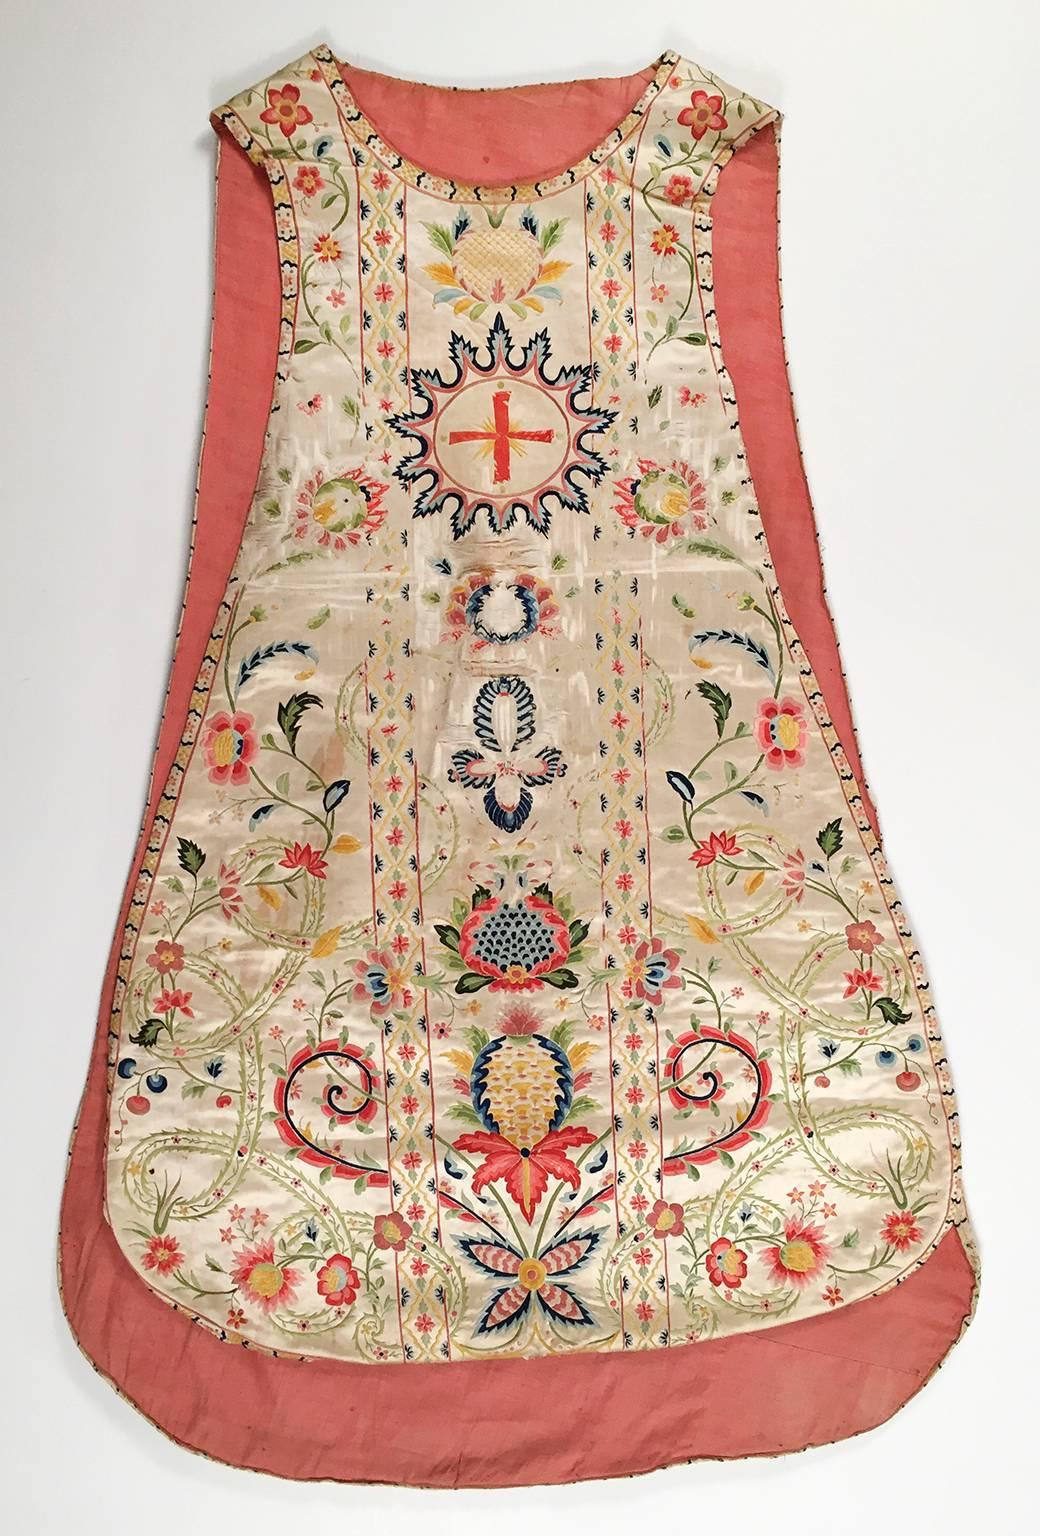 Fiddle back style with floral, pineapple and cross motifs on a crème colored silk satin. Wear on front of chasuble from necklaces. Heavily embroidered in multi-colored silk threads.